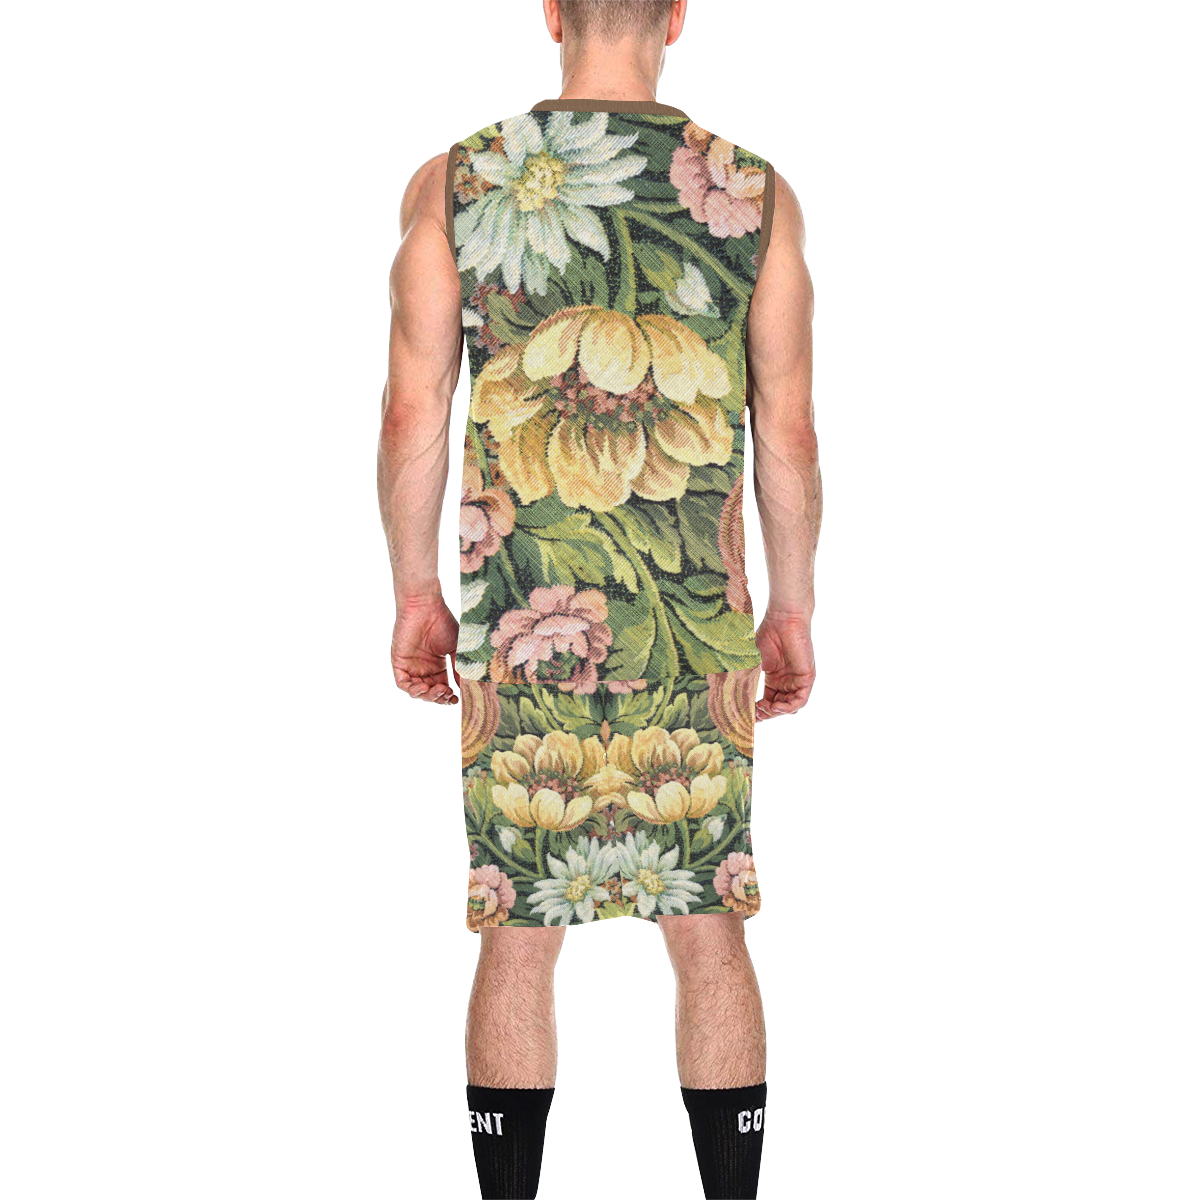 grandma's vintage floral couch All Over Print Basketball Uniform